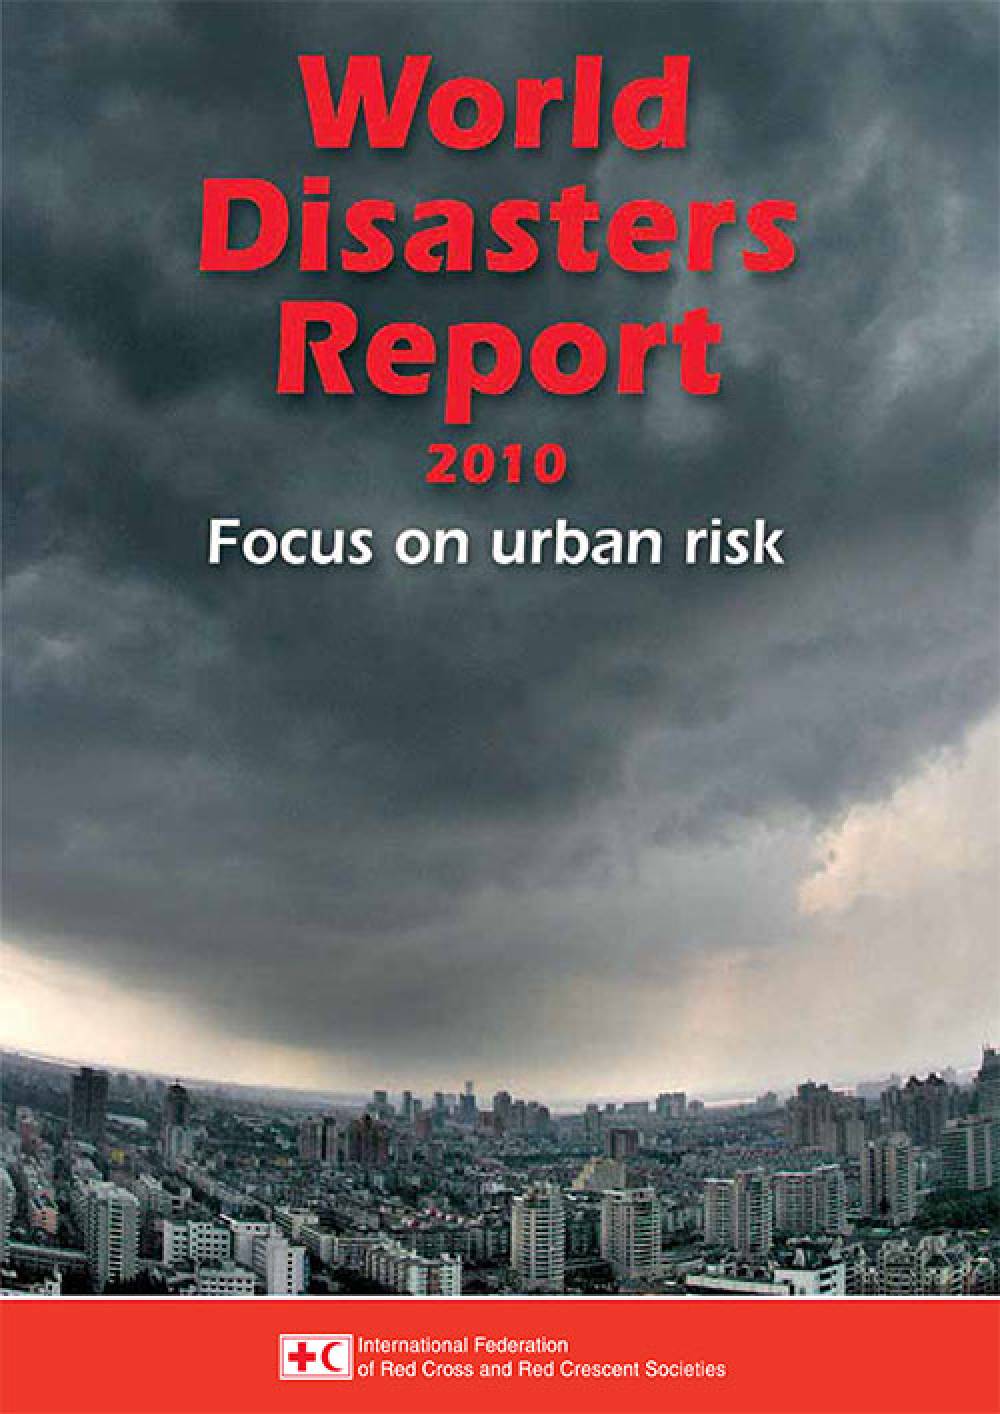 World Disaster Report 2010